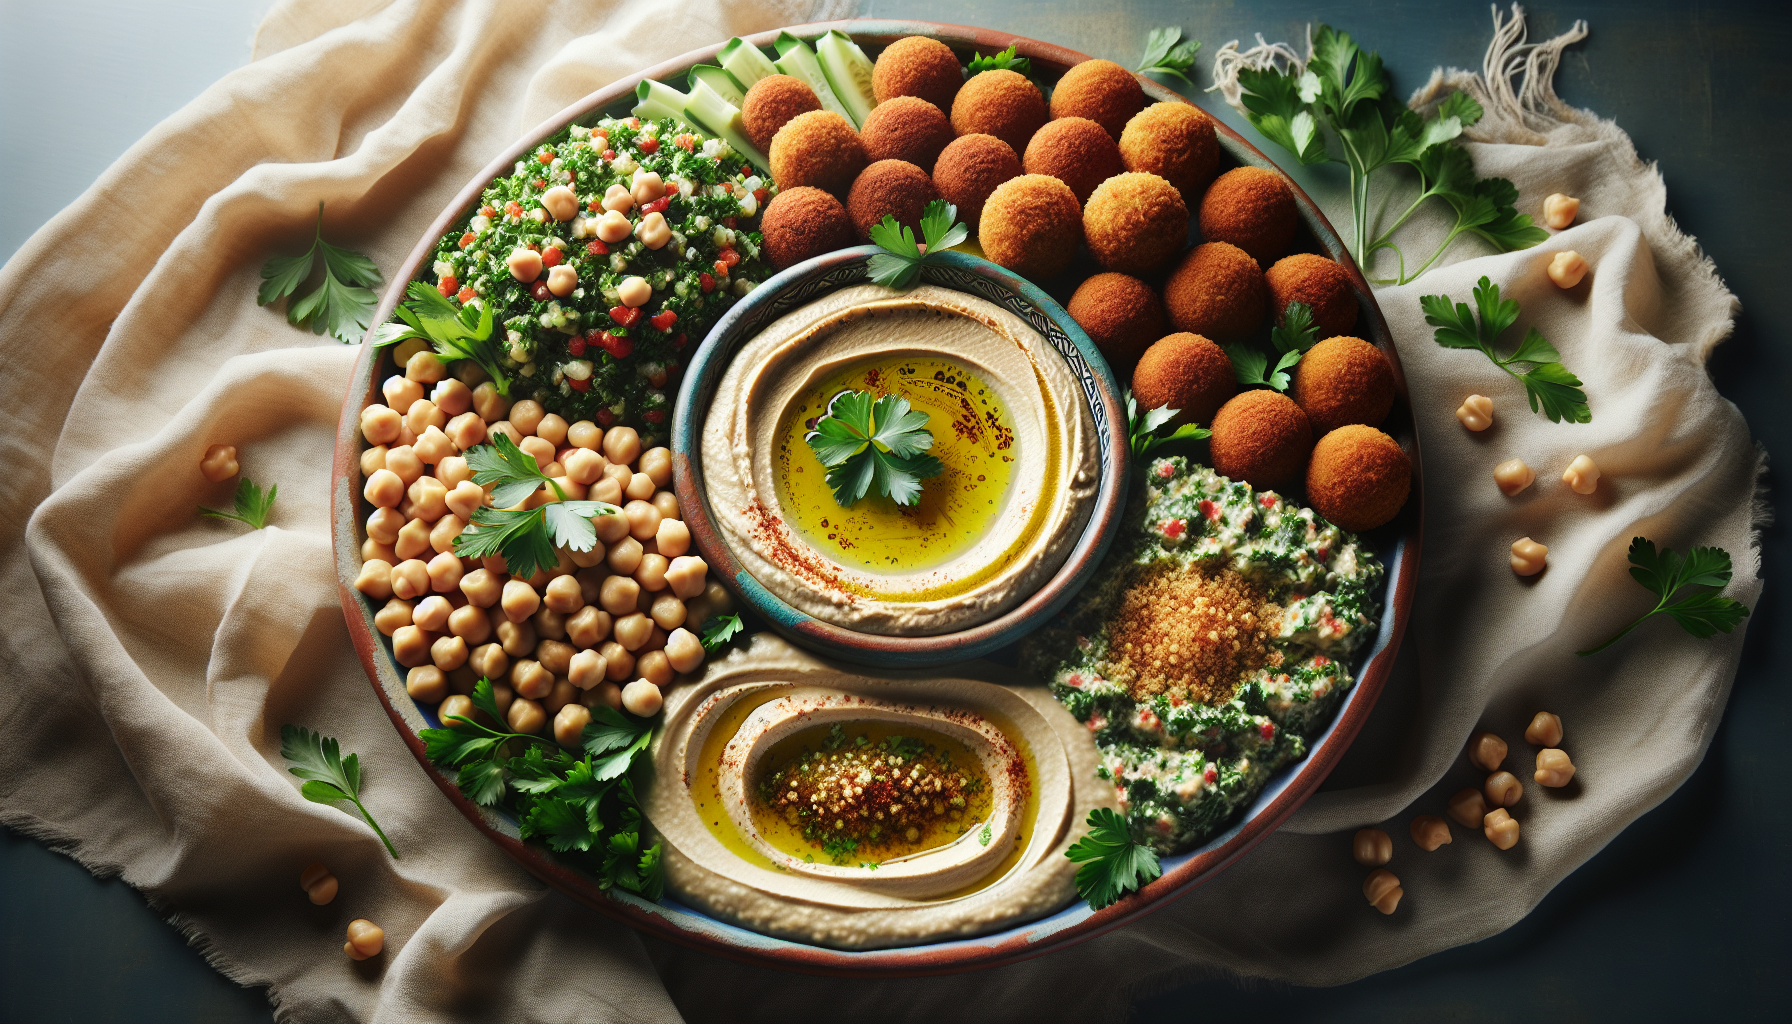 Share Your Quick And Easy Middle Eastern Mezze Platter Recipe.